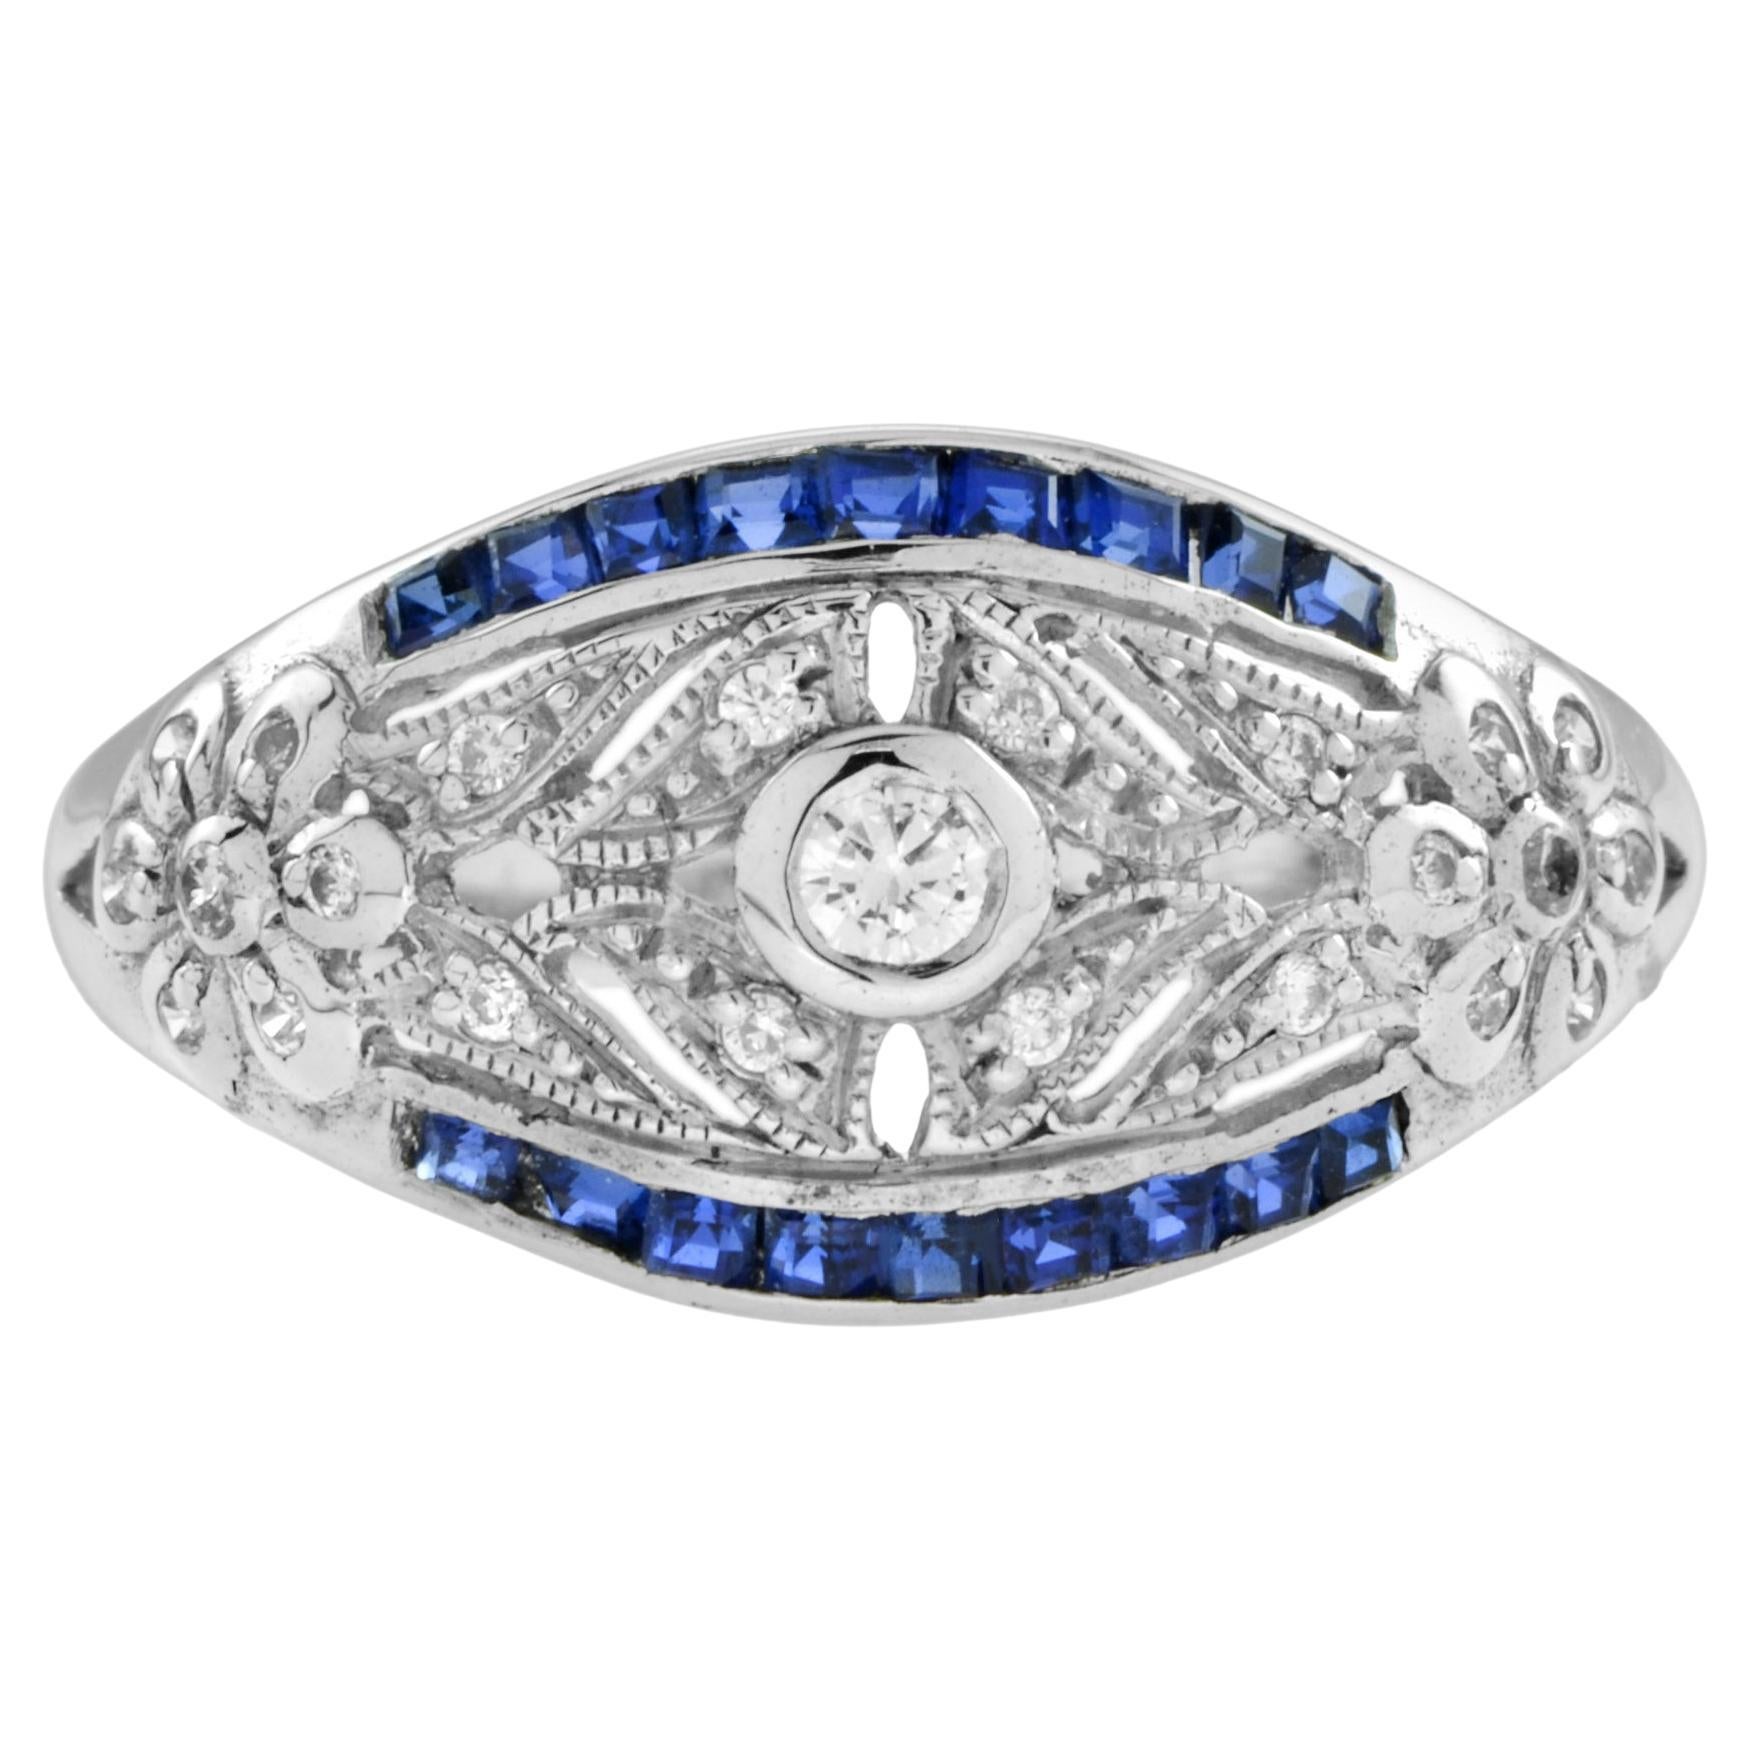 For Sale:  Art Deco Style Diamond and Sapphire Ring in 14K White Gold